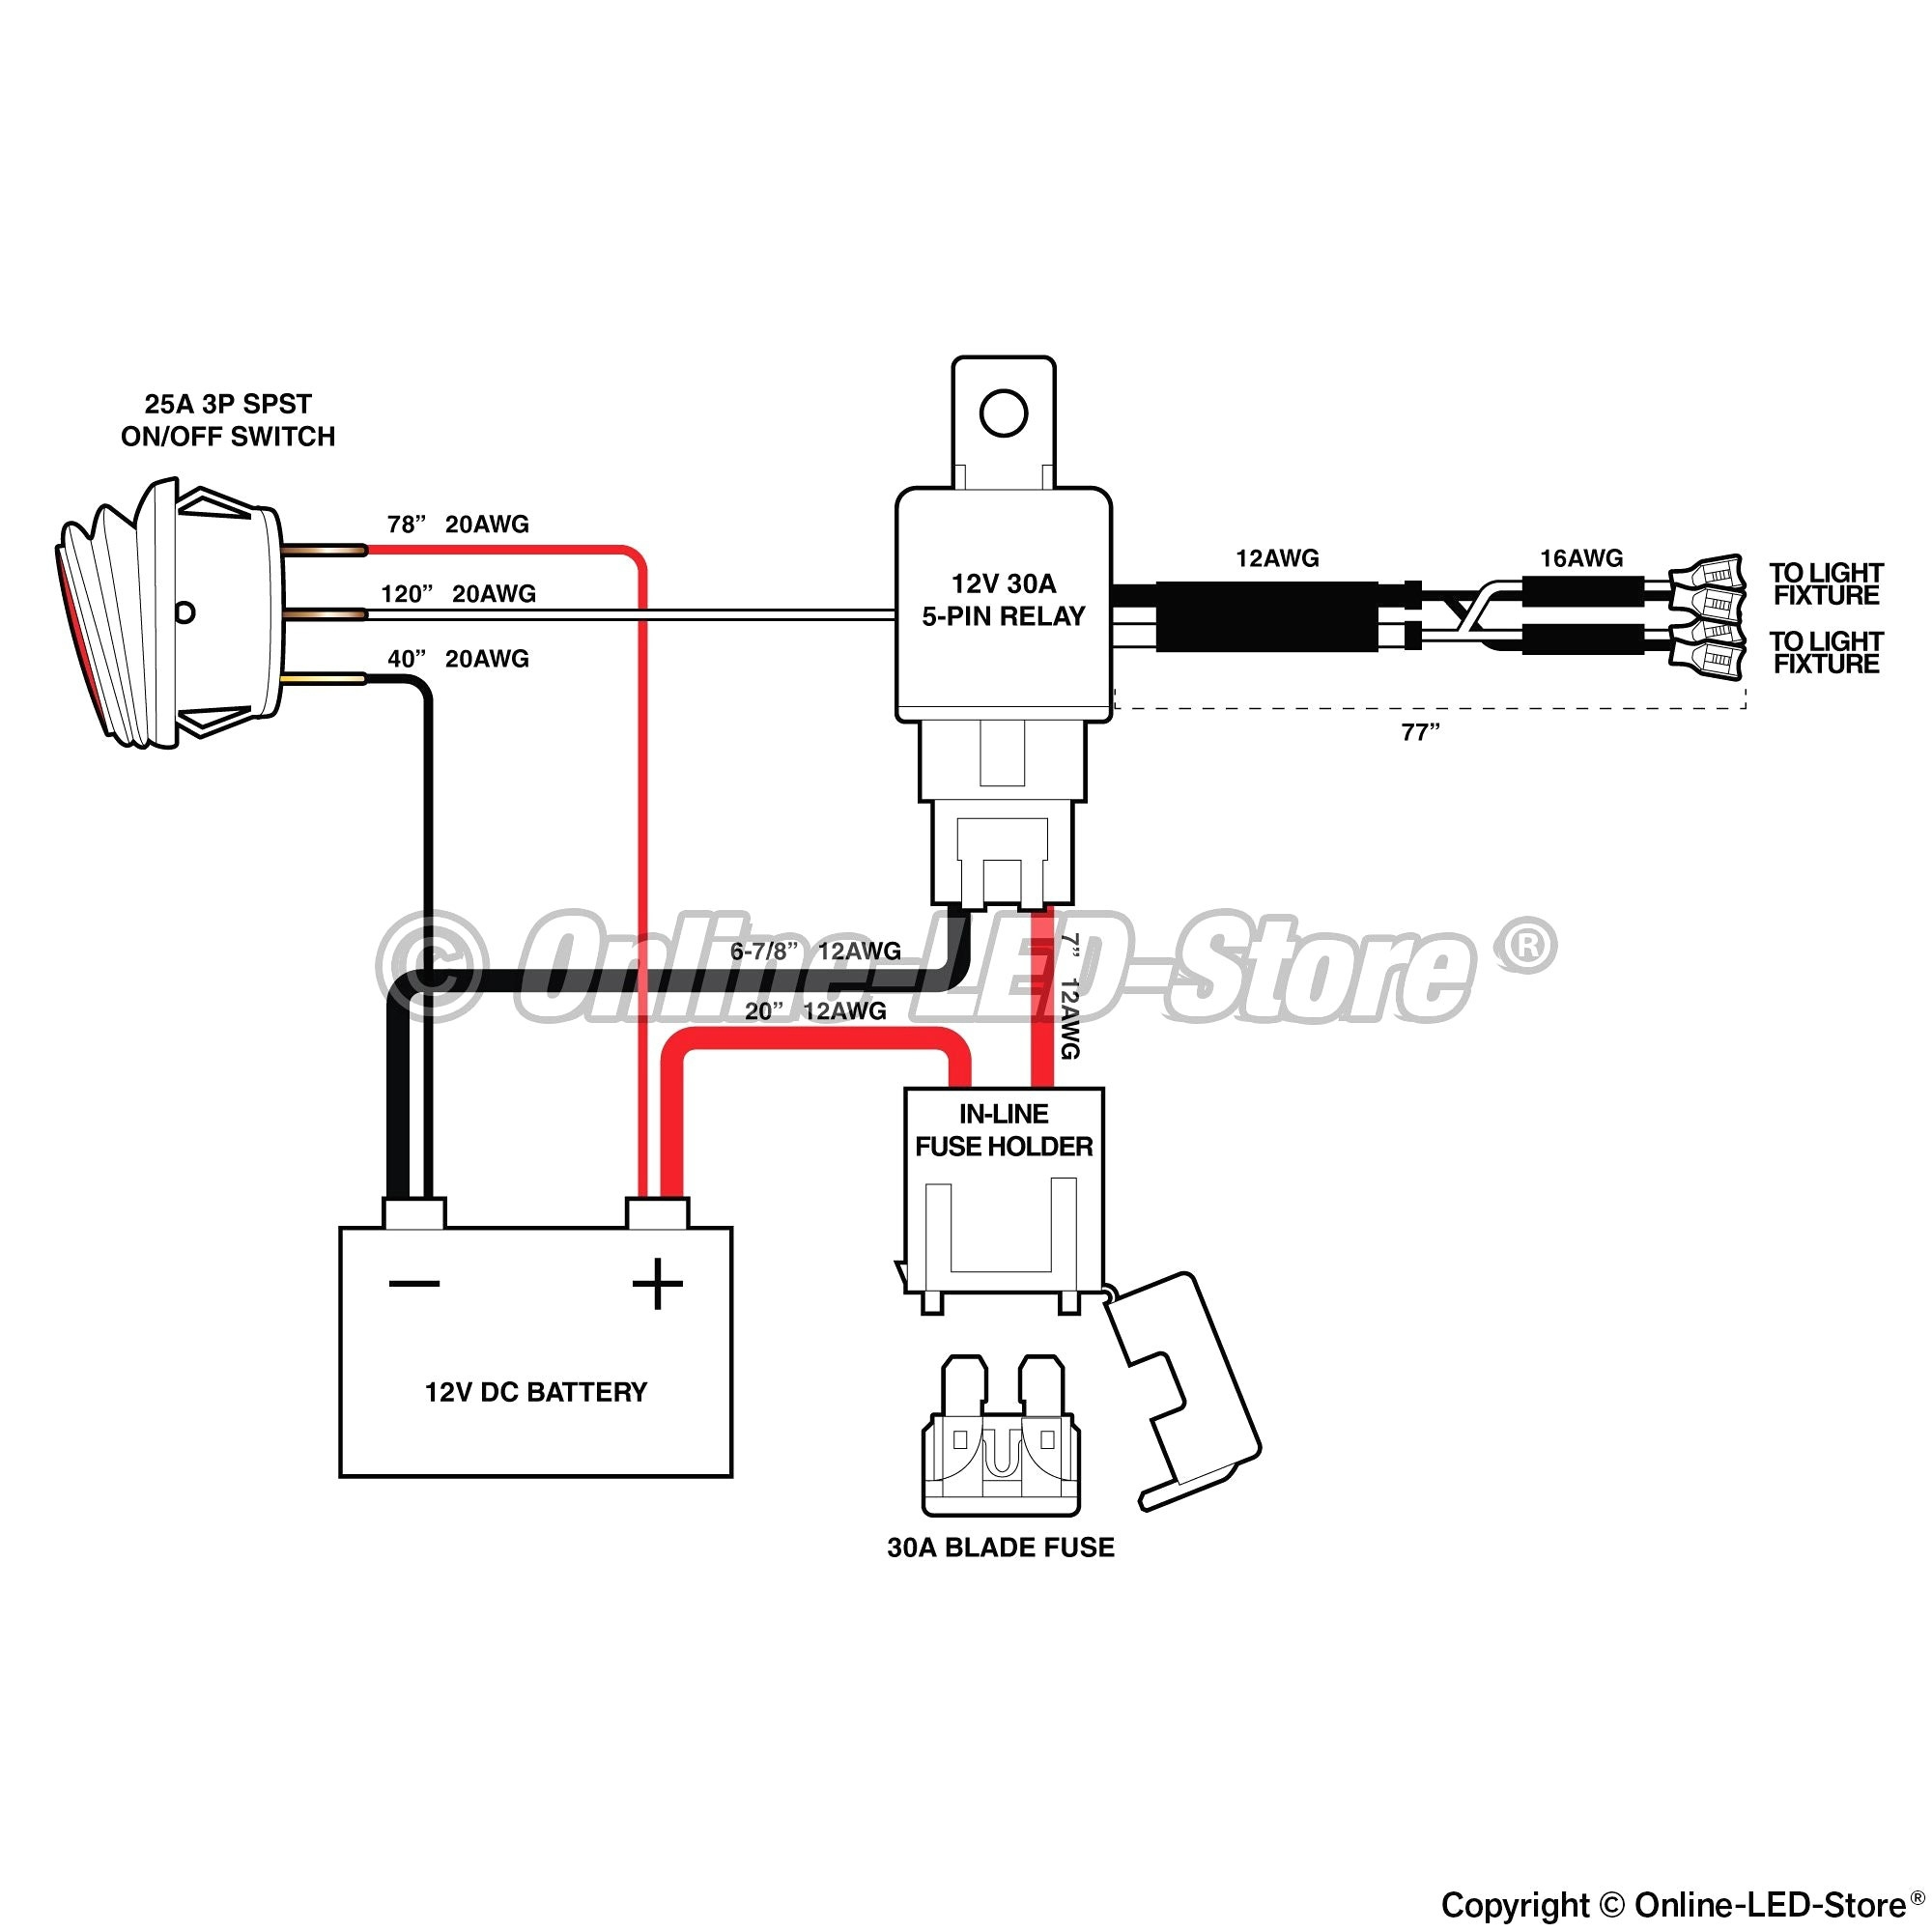 3 Way Wiring Diagram Wiring Diagram Comswitchlinc Relay 3 Way Switch Ceiling Fan Wiring